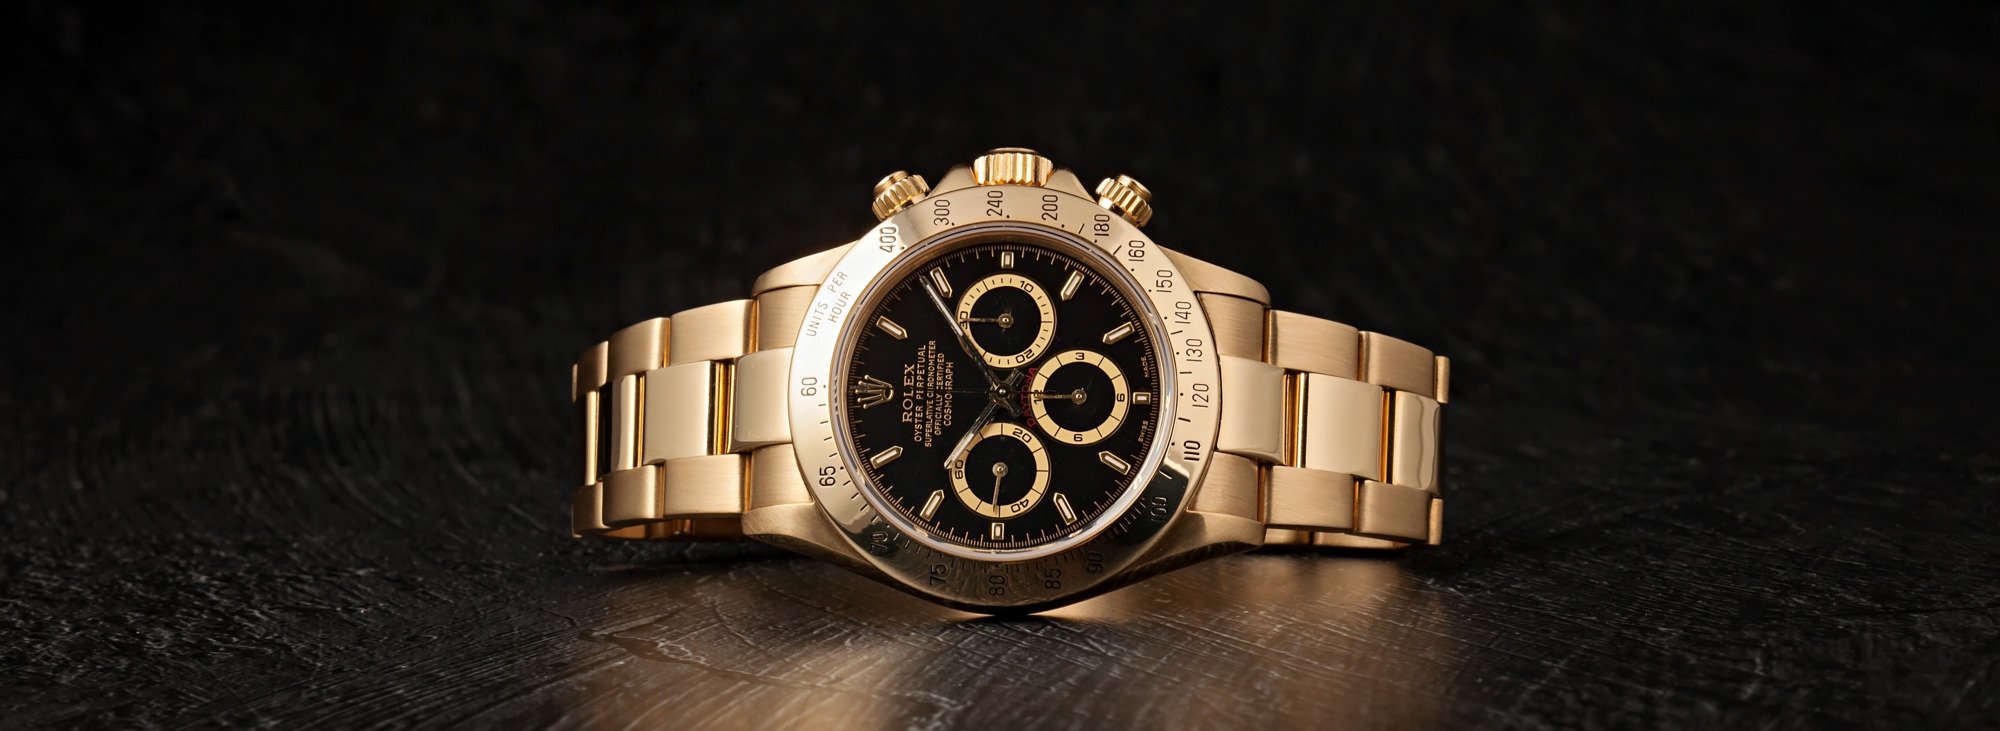 Where Are Rolex Watches Made?